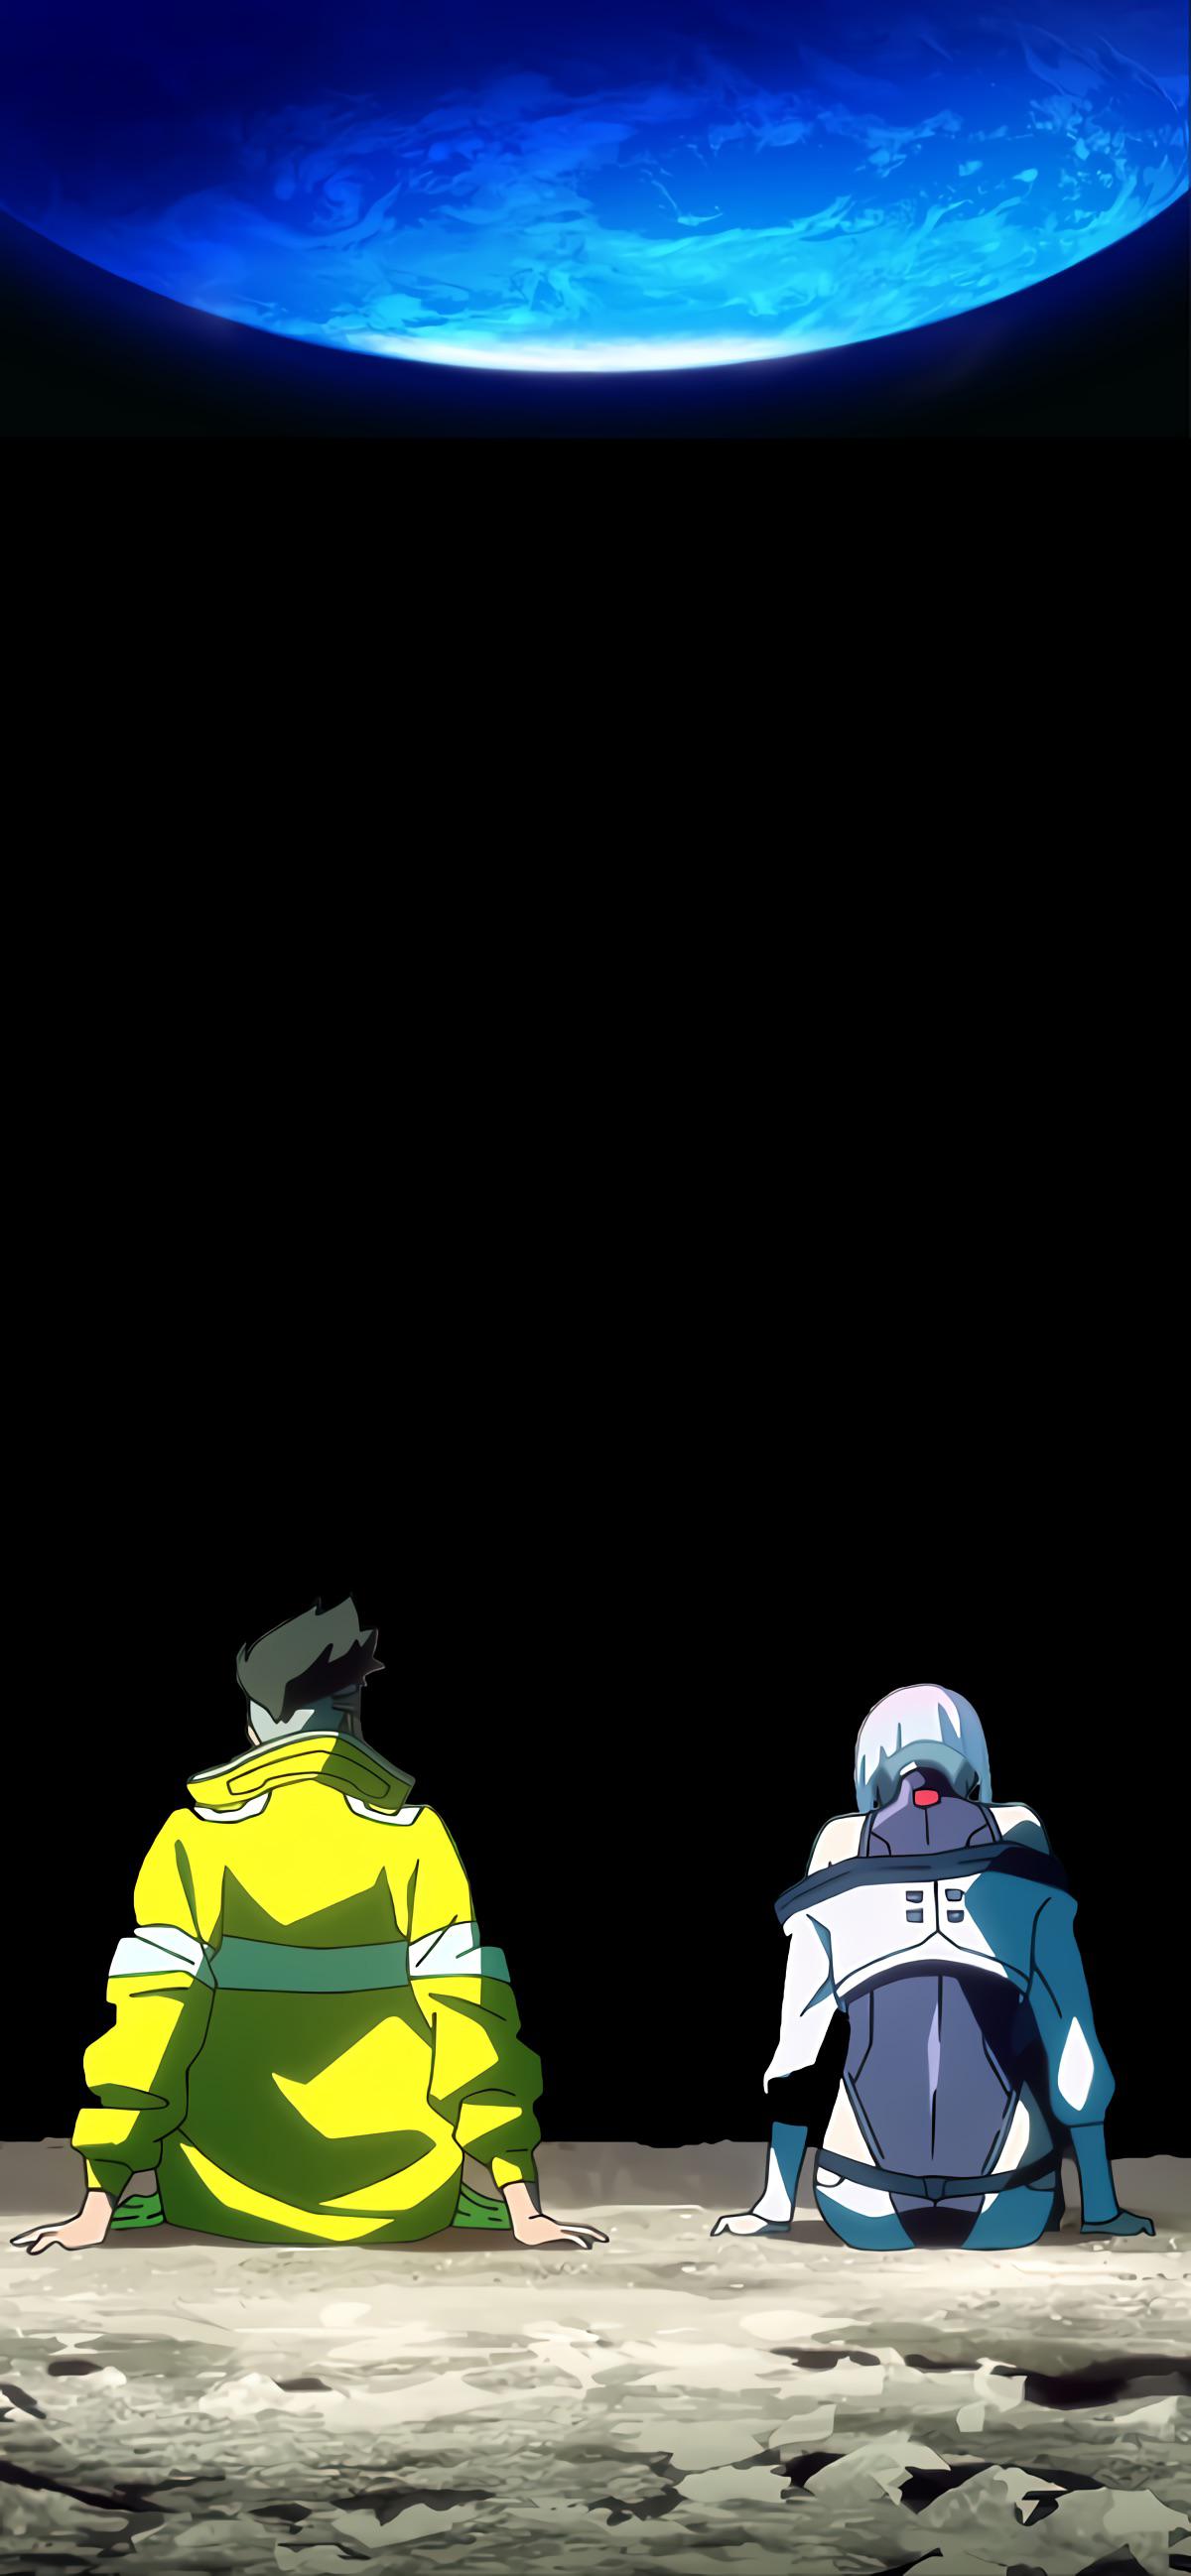 Made this wallpaper for iPhone